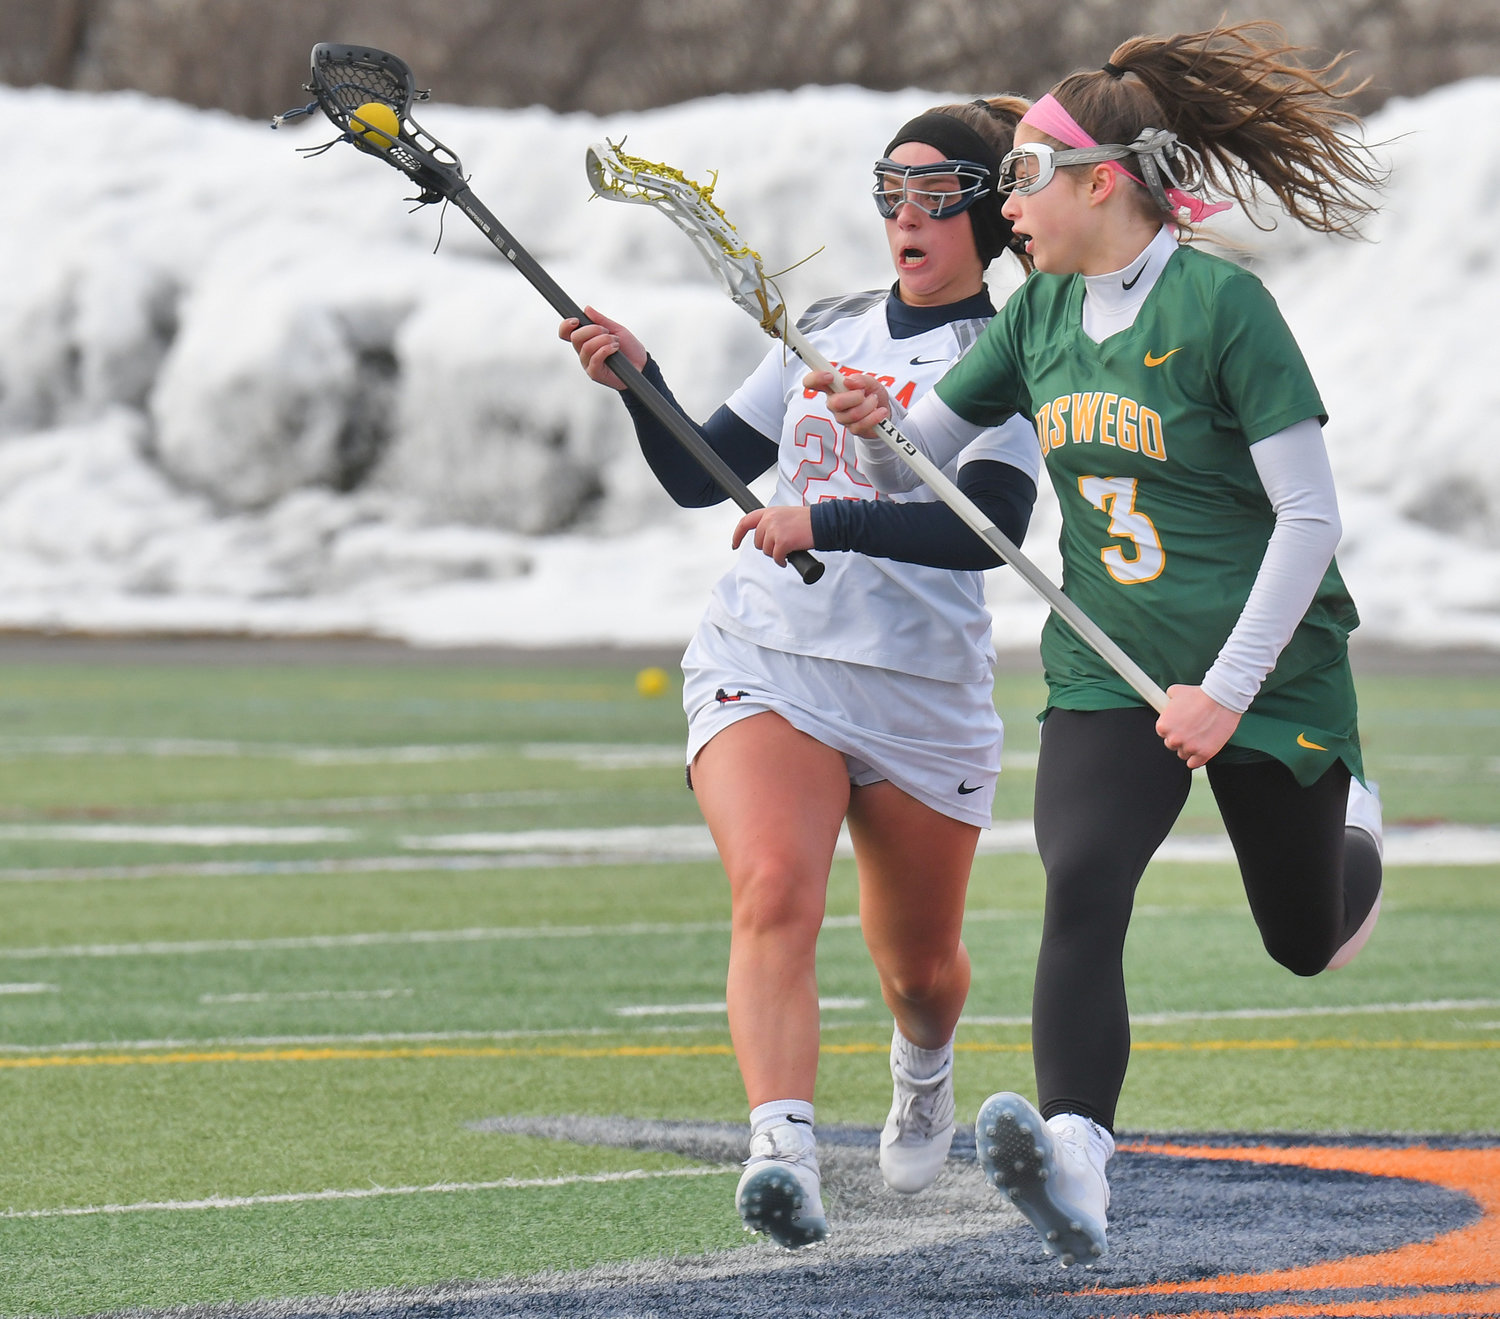 CLOSELY DEFENDED — Utica University’s Alyssa Drell drives as SUNY Oswego’s Noelle Smith defends in the first quarter of Wednesday’s non-league women’s lacrosse game at Gaetano Stadium in Utica. Drell scored a pair of goals, but SUNY Oswego won 6-5. Both teams are 2-1 on the season.